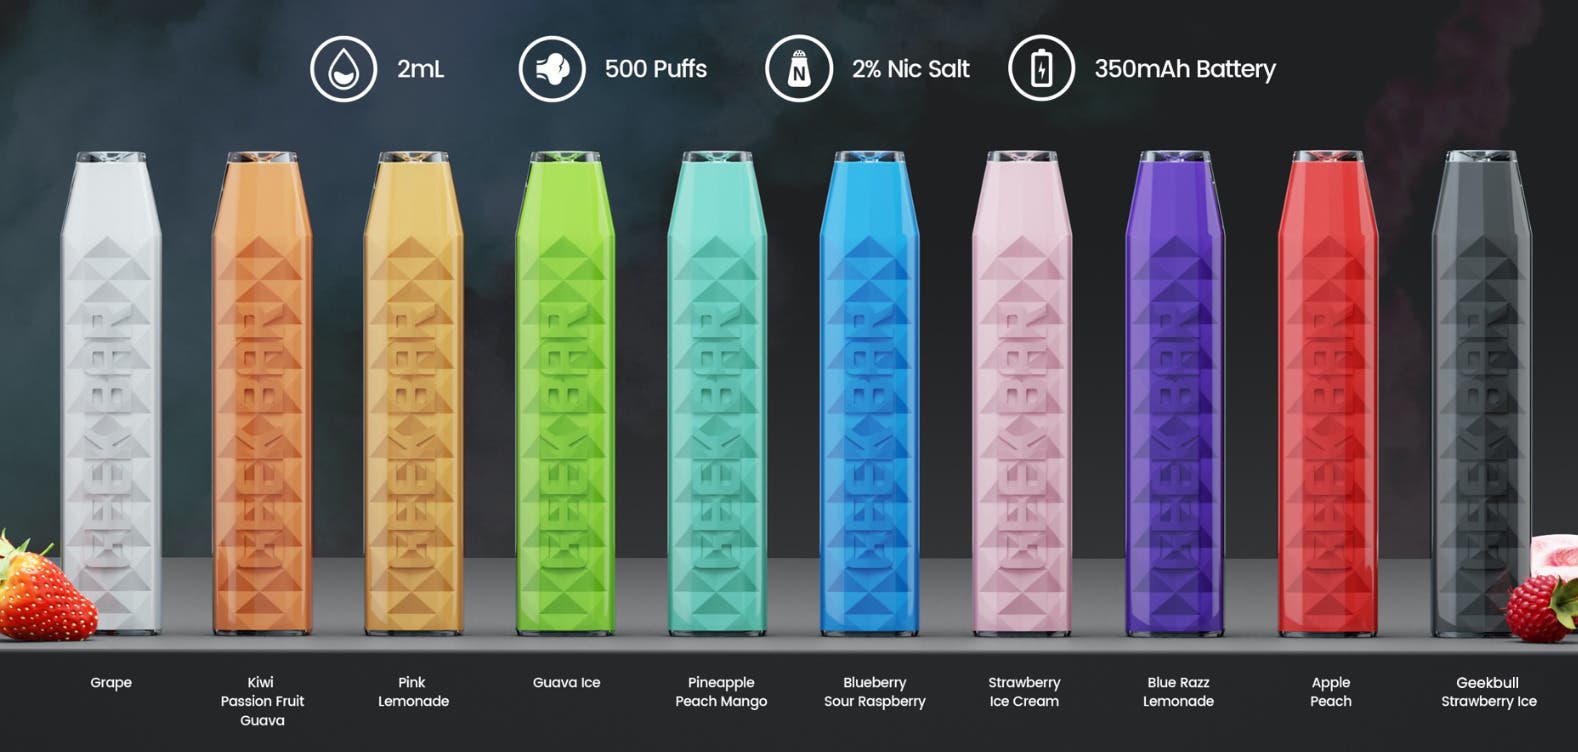 The Geek Bar C500 is available in 10 flavours.